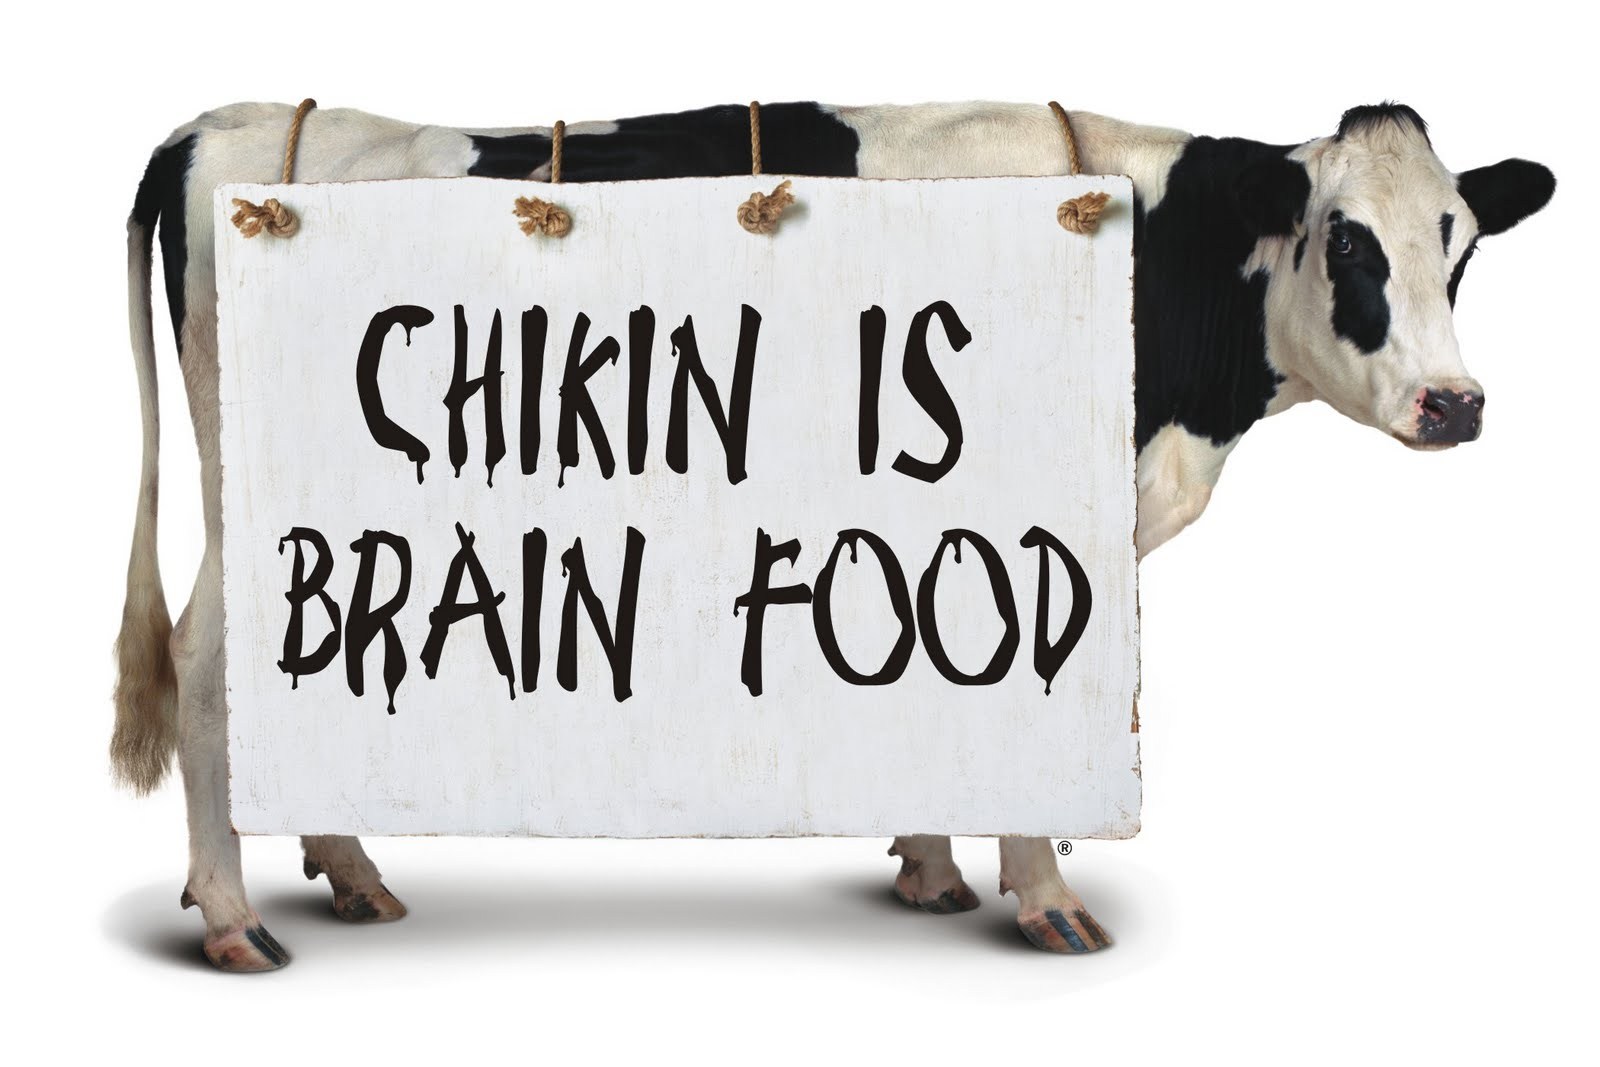 chick-fil-a-cow-clipart-1.